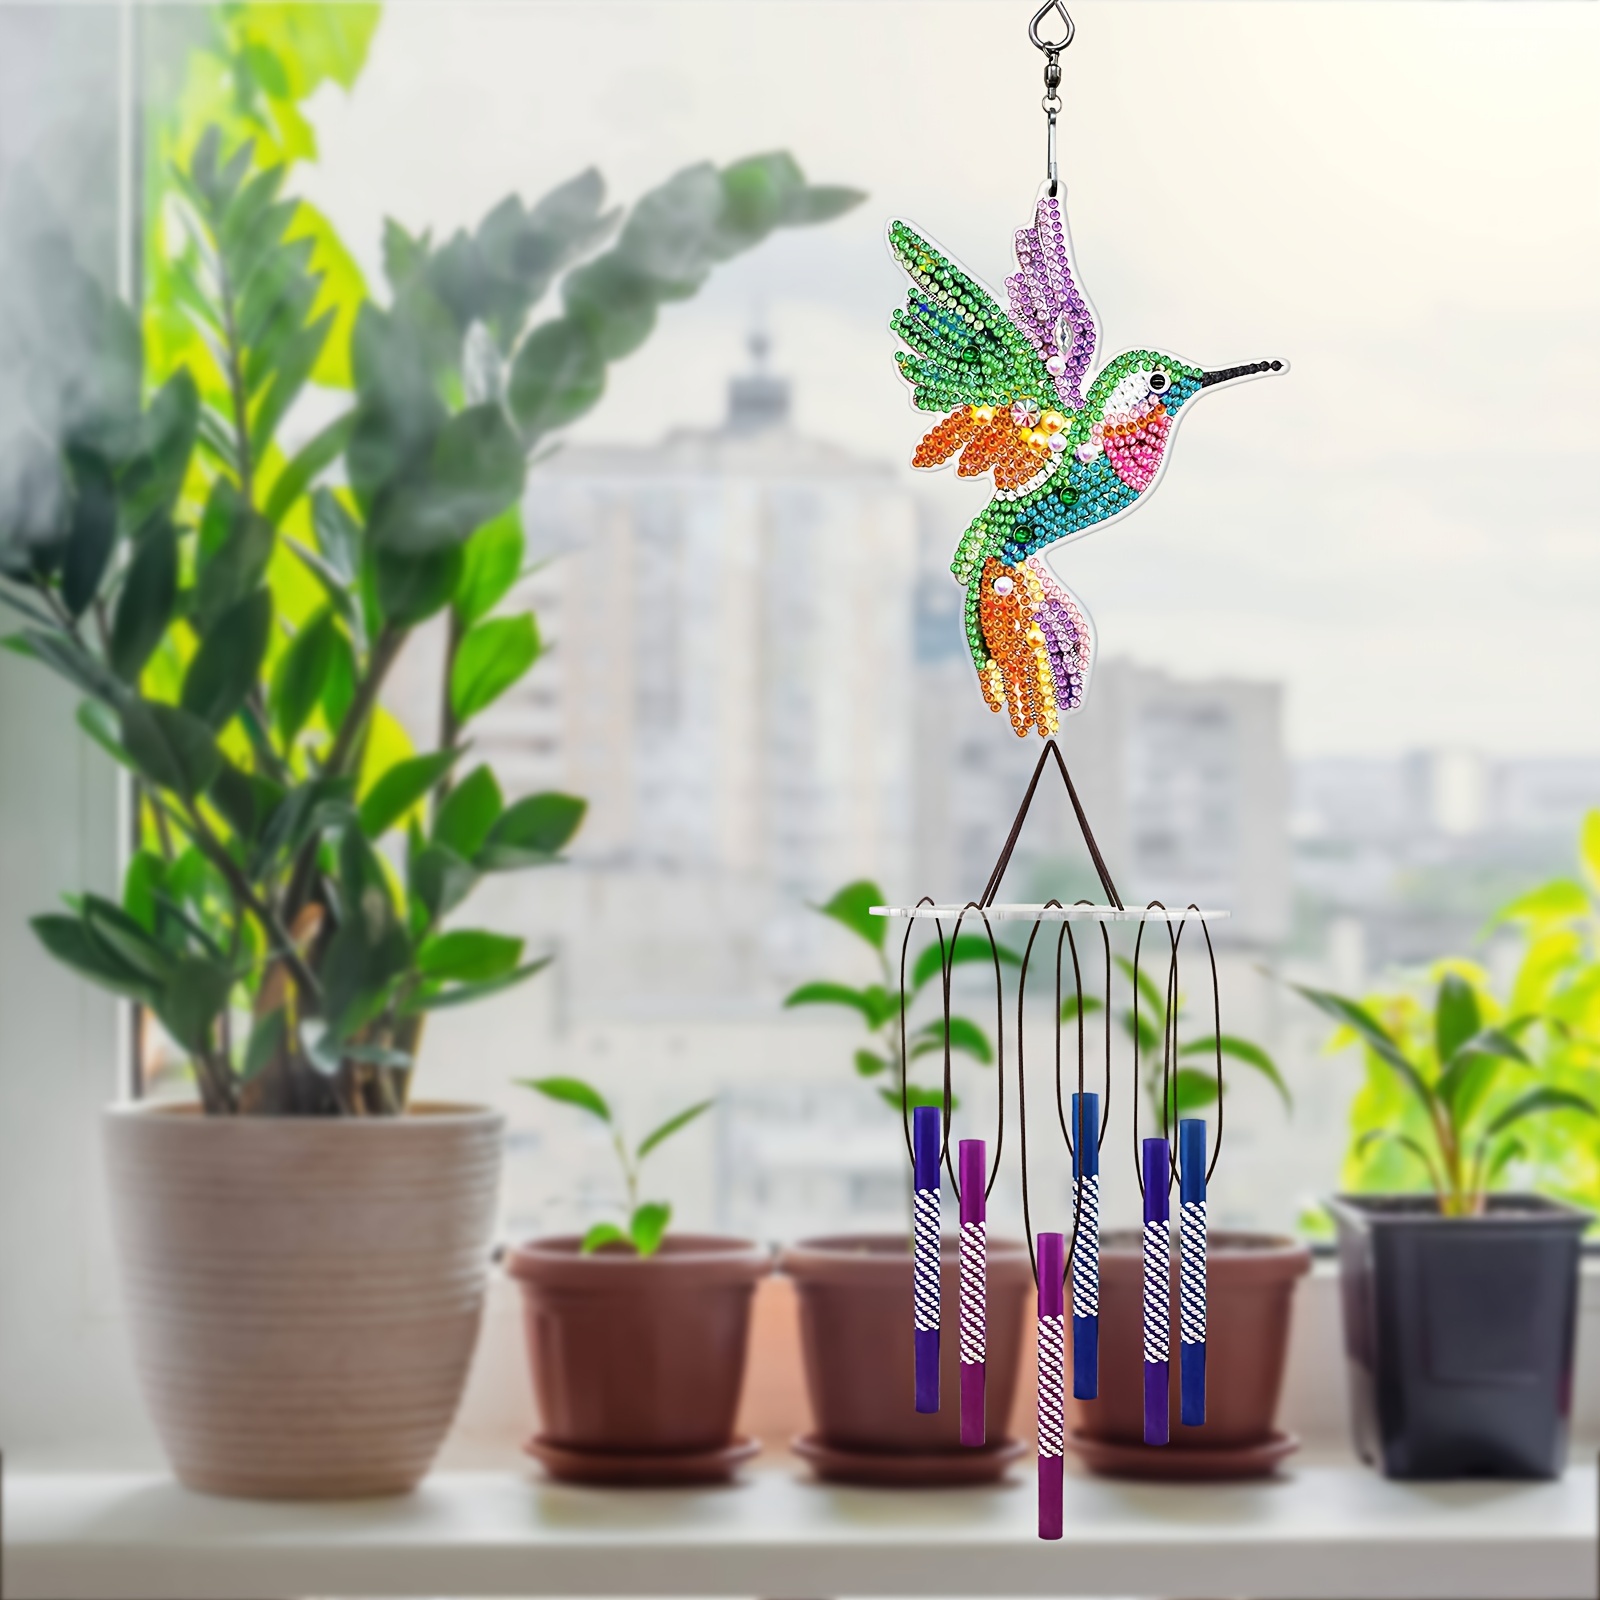  4 Pcs Diamond Painting Kits 5D Diamond Painting Suncatcher  Double Sided DIY Wind Chime Kit Diamond Art for Kids Butterfly Bee  Hummingbird Ornament for Adults Kids Home Garden Supplies (Bright Style) 